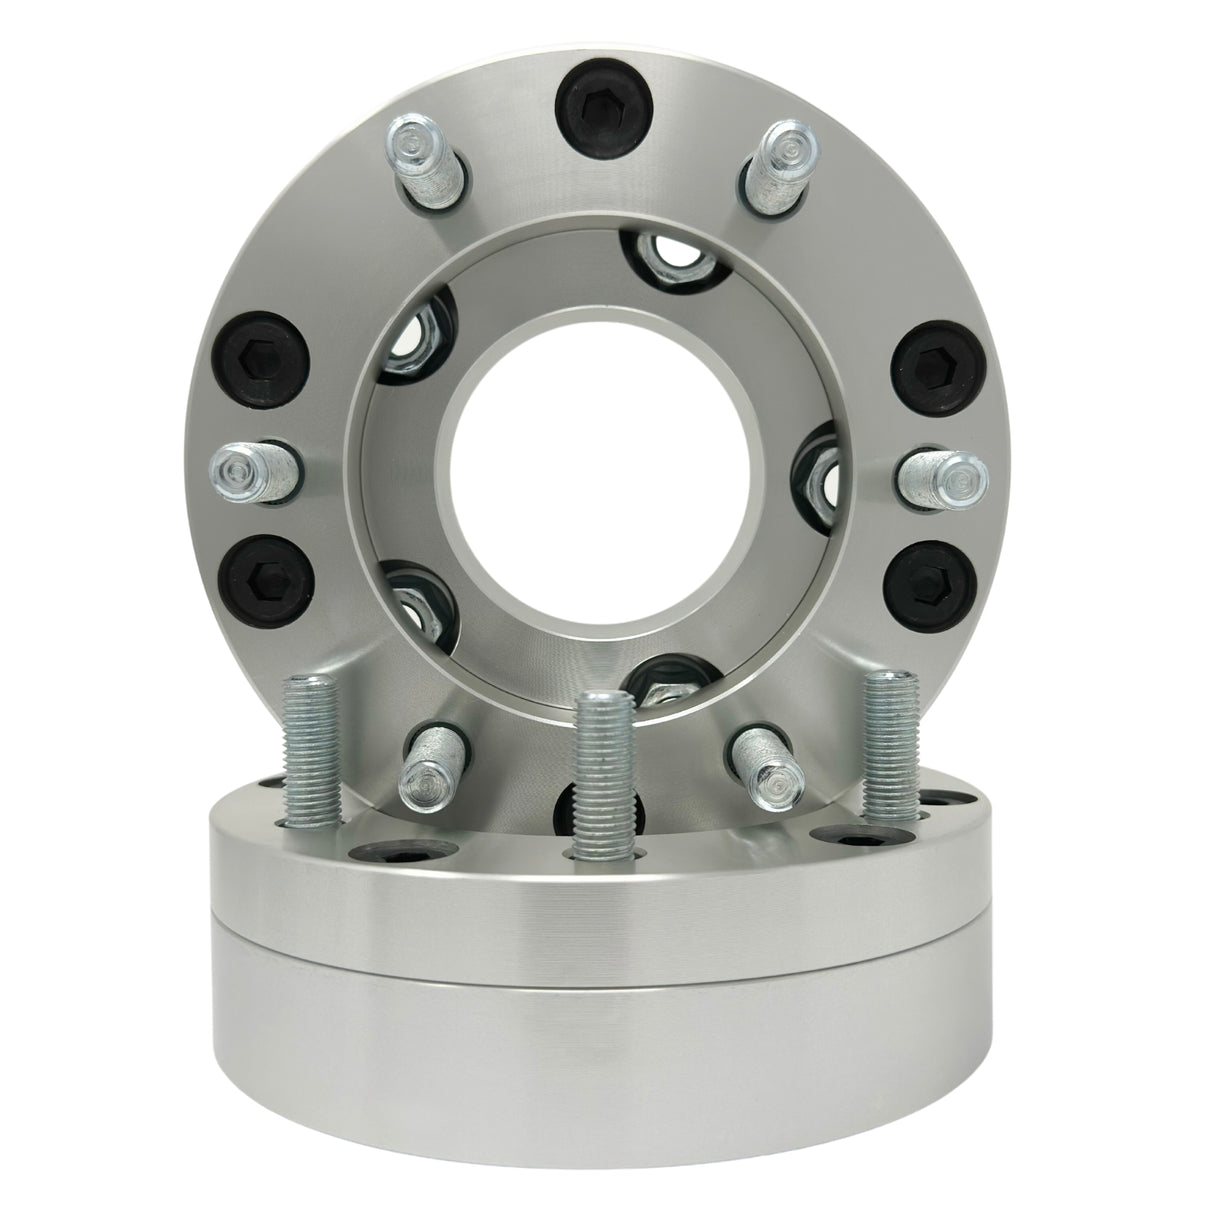 5x5.5 to 6x5.5 2-Piece Wheel Adapter 2” Inch (50mm) 14x1.5 Studs & Lug Nuts 108mm Center Bore | 5x139.7 to 6x139.7